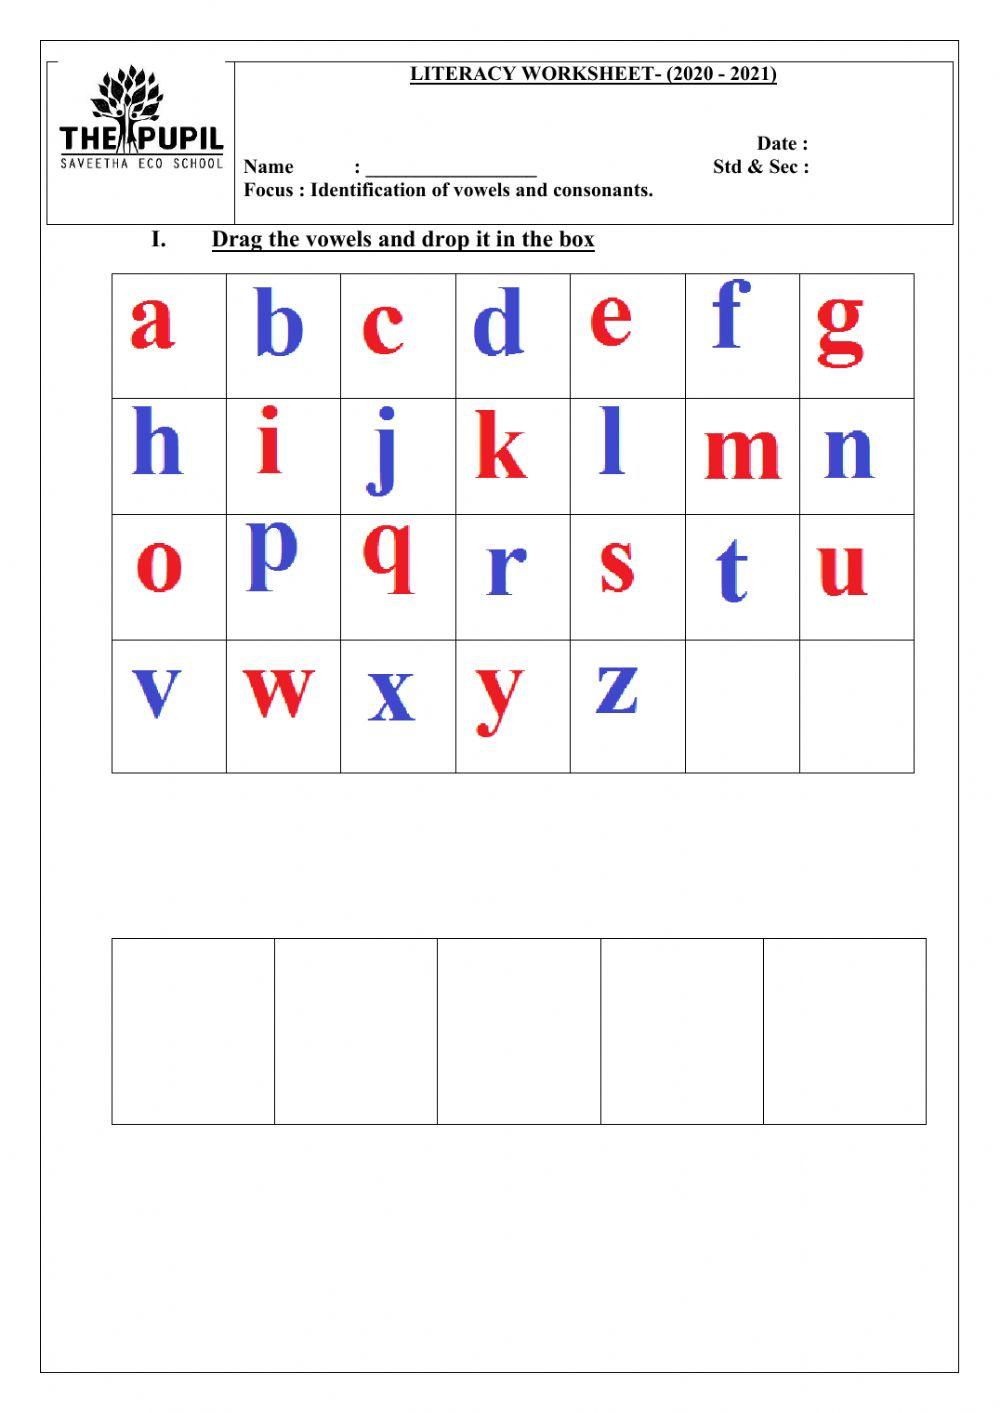 Vowels and sight words